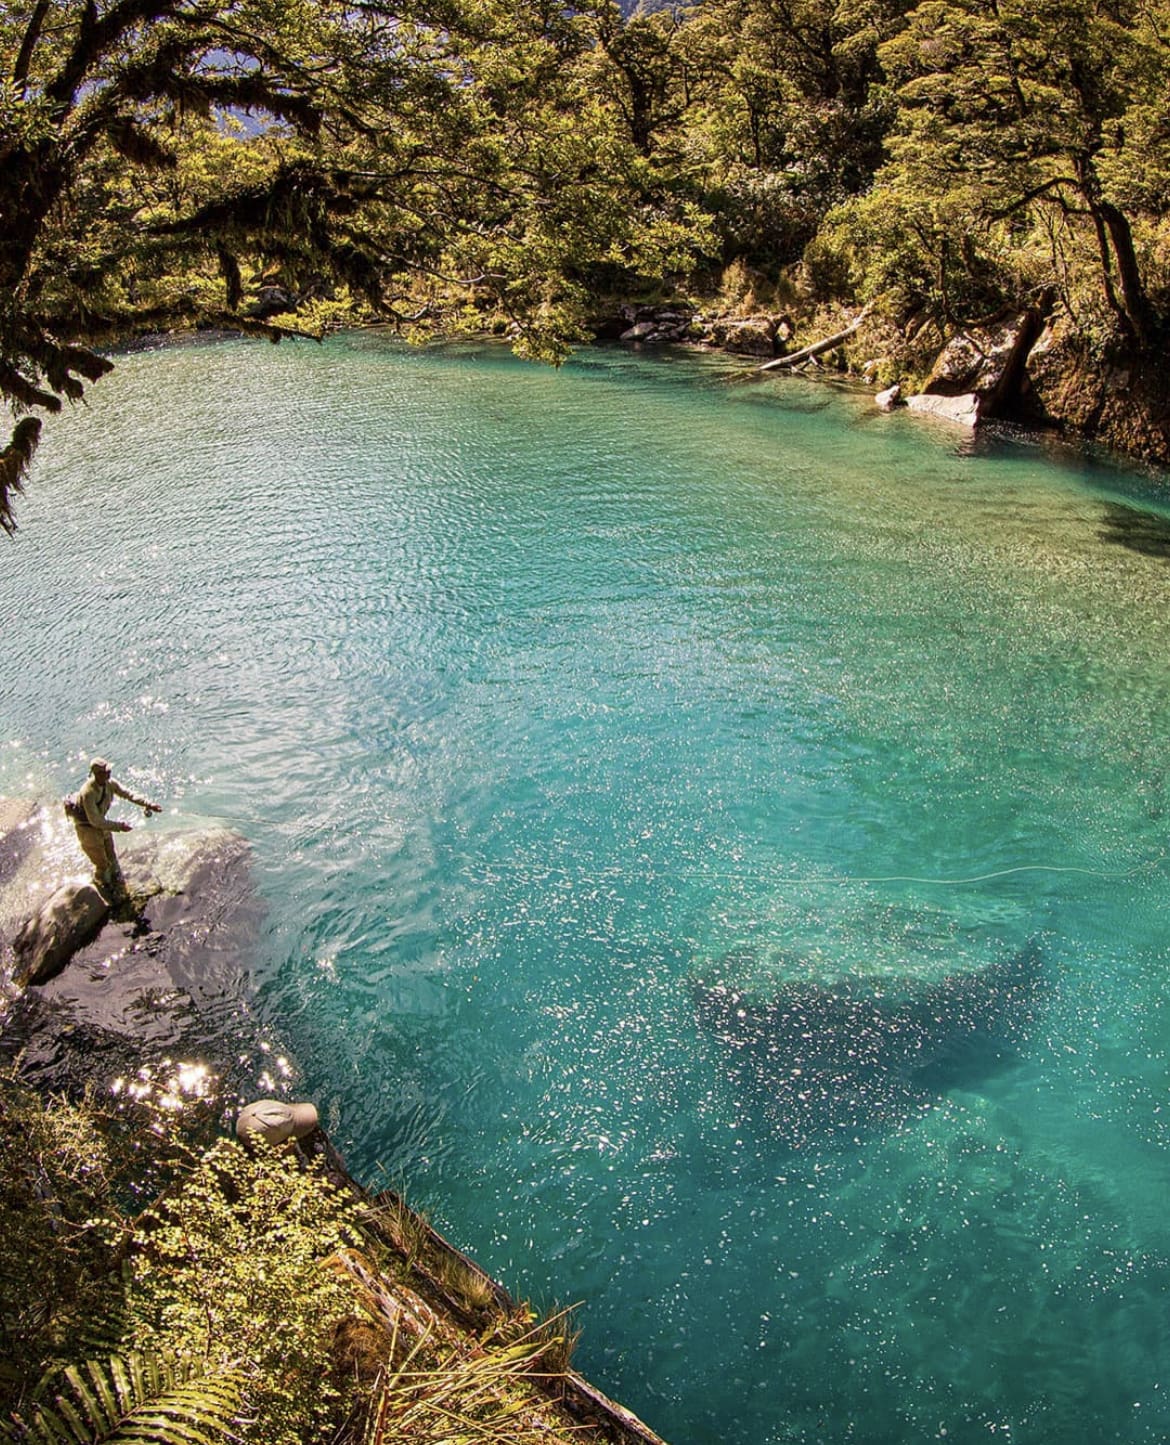 Casting into glacial rivers on New Zealand's South Island